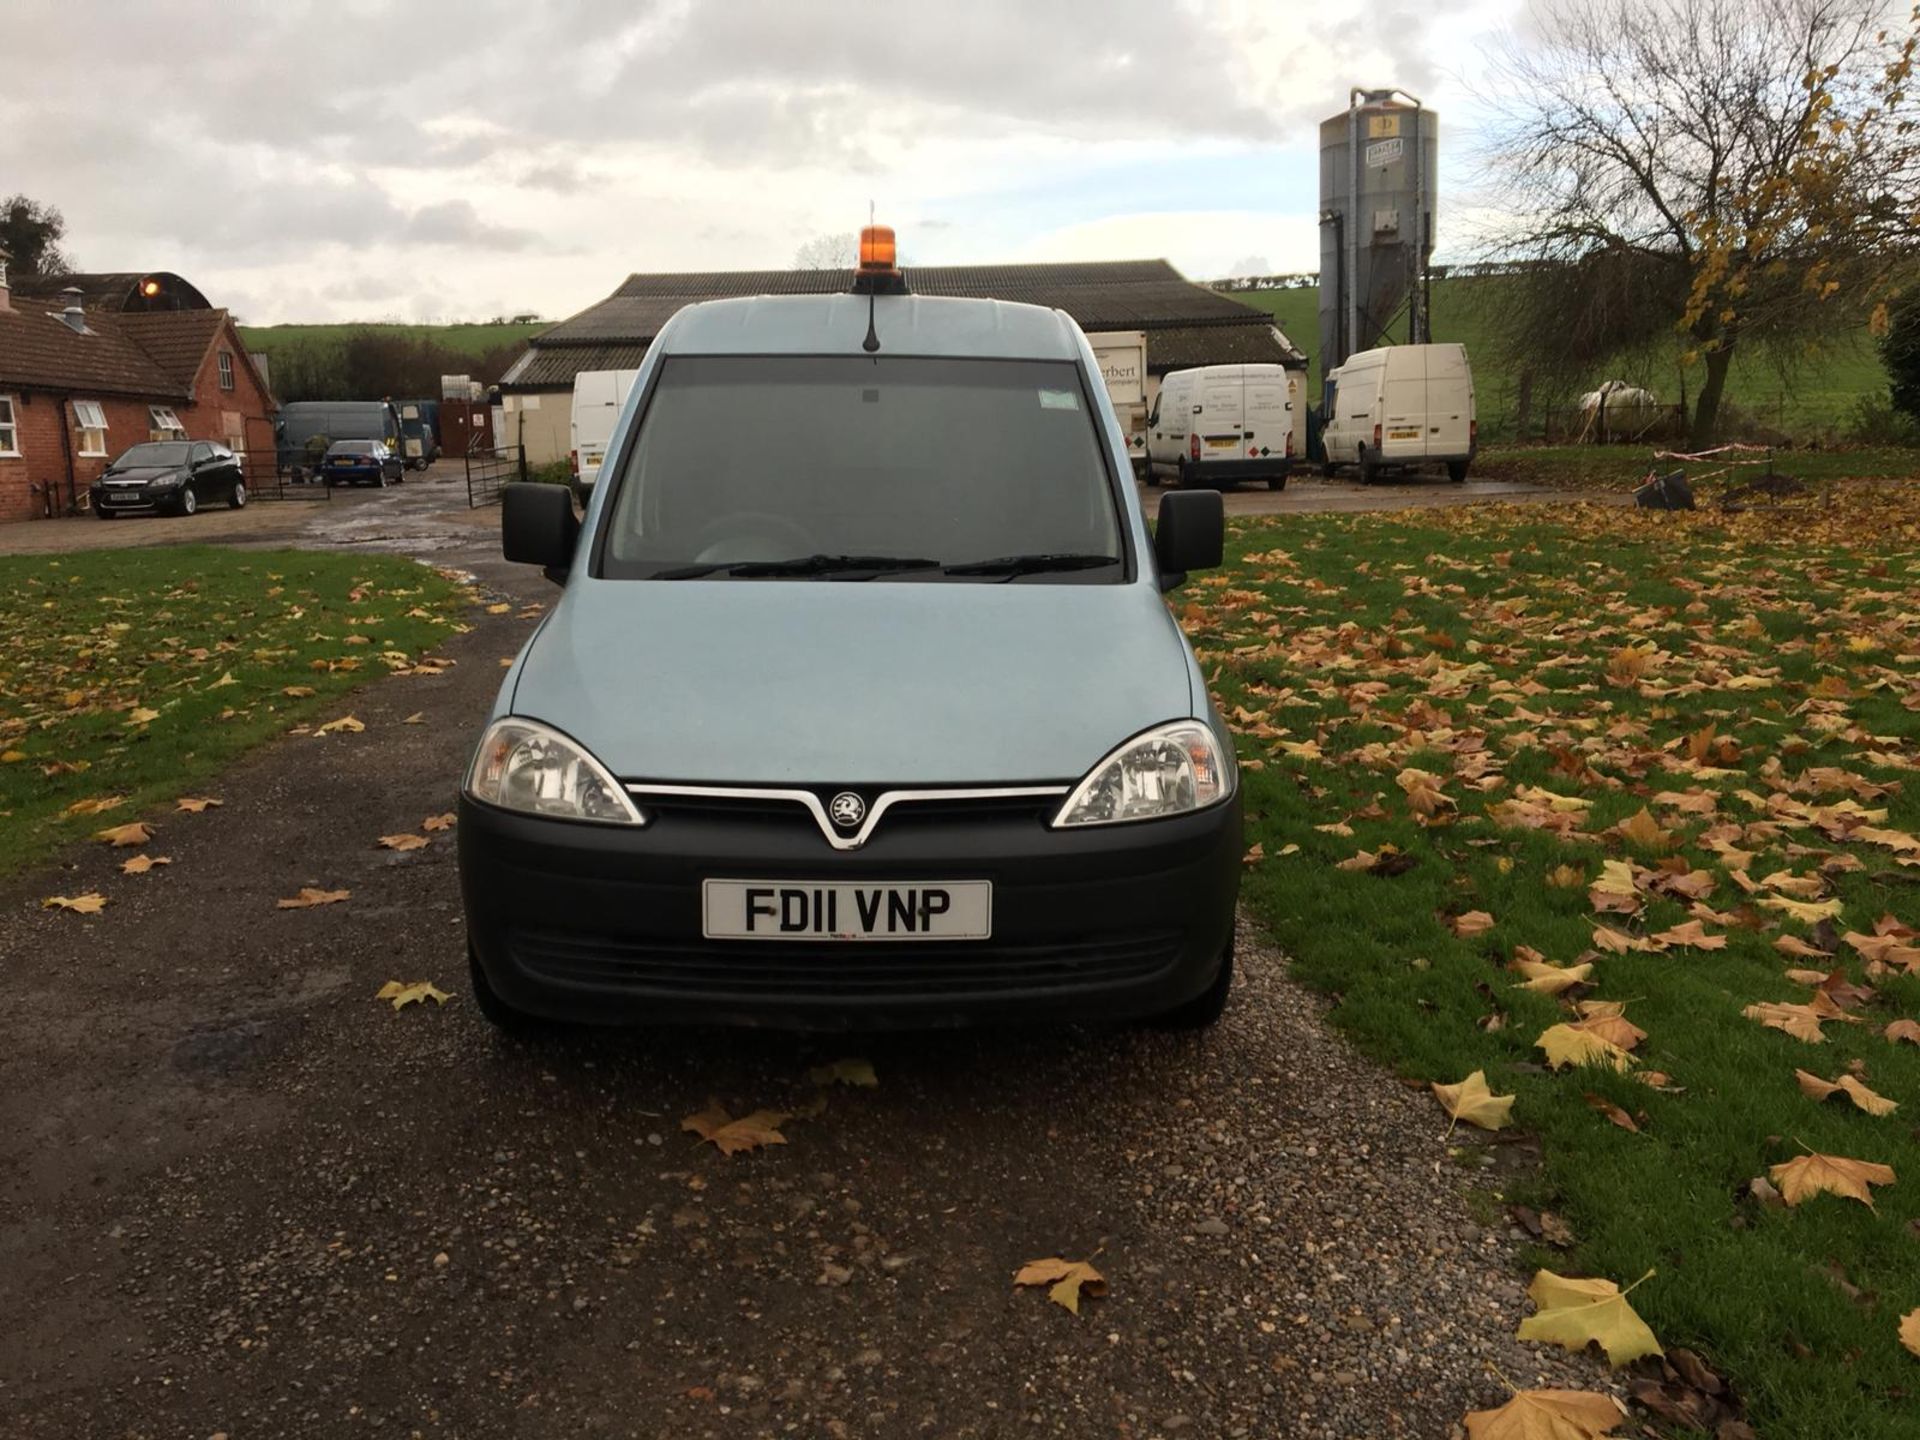 2011/11 REG VAUXHALL COMBO 2000 CDTI SEMI-AUTO GEARBOX, SHOWING 0 FORMER KEEPERS *NO VAT* - Image 2 of 12